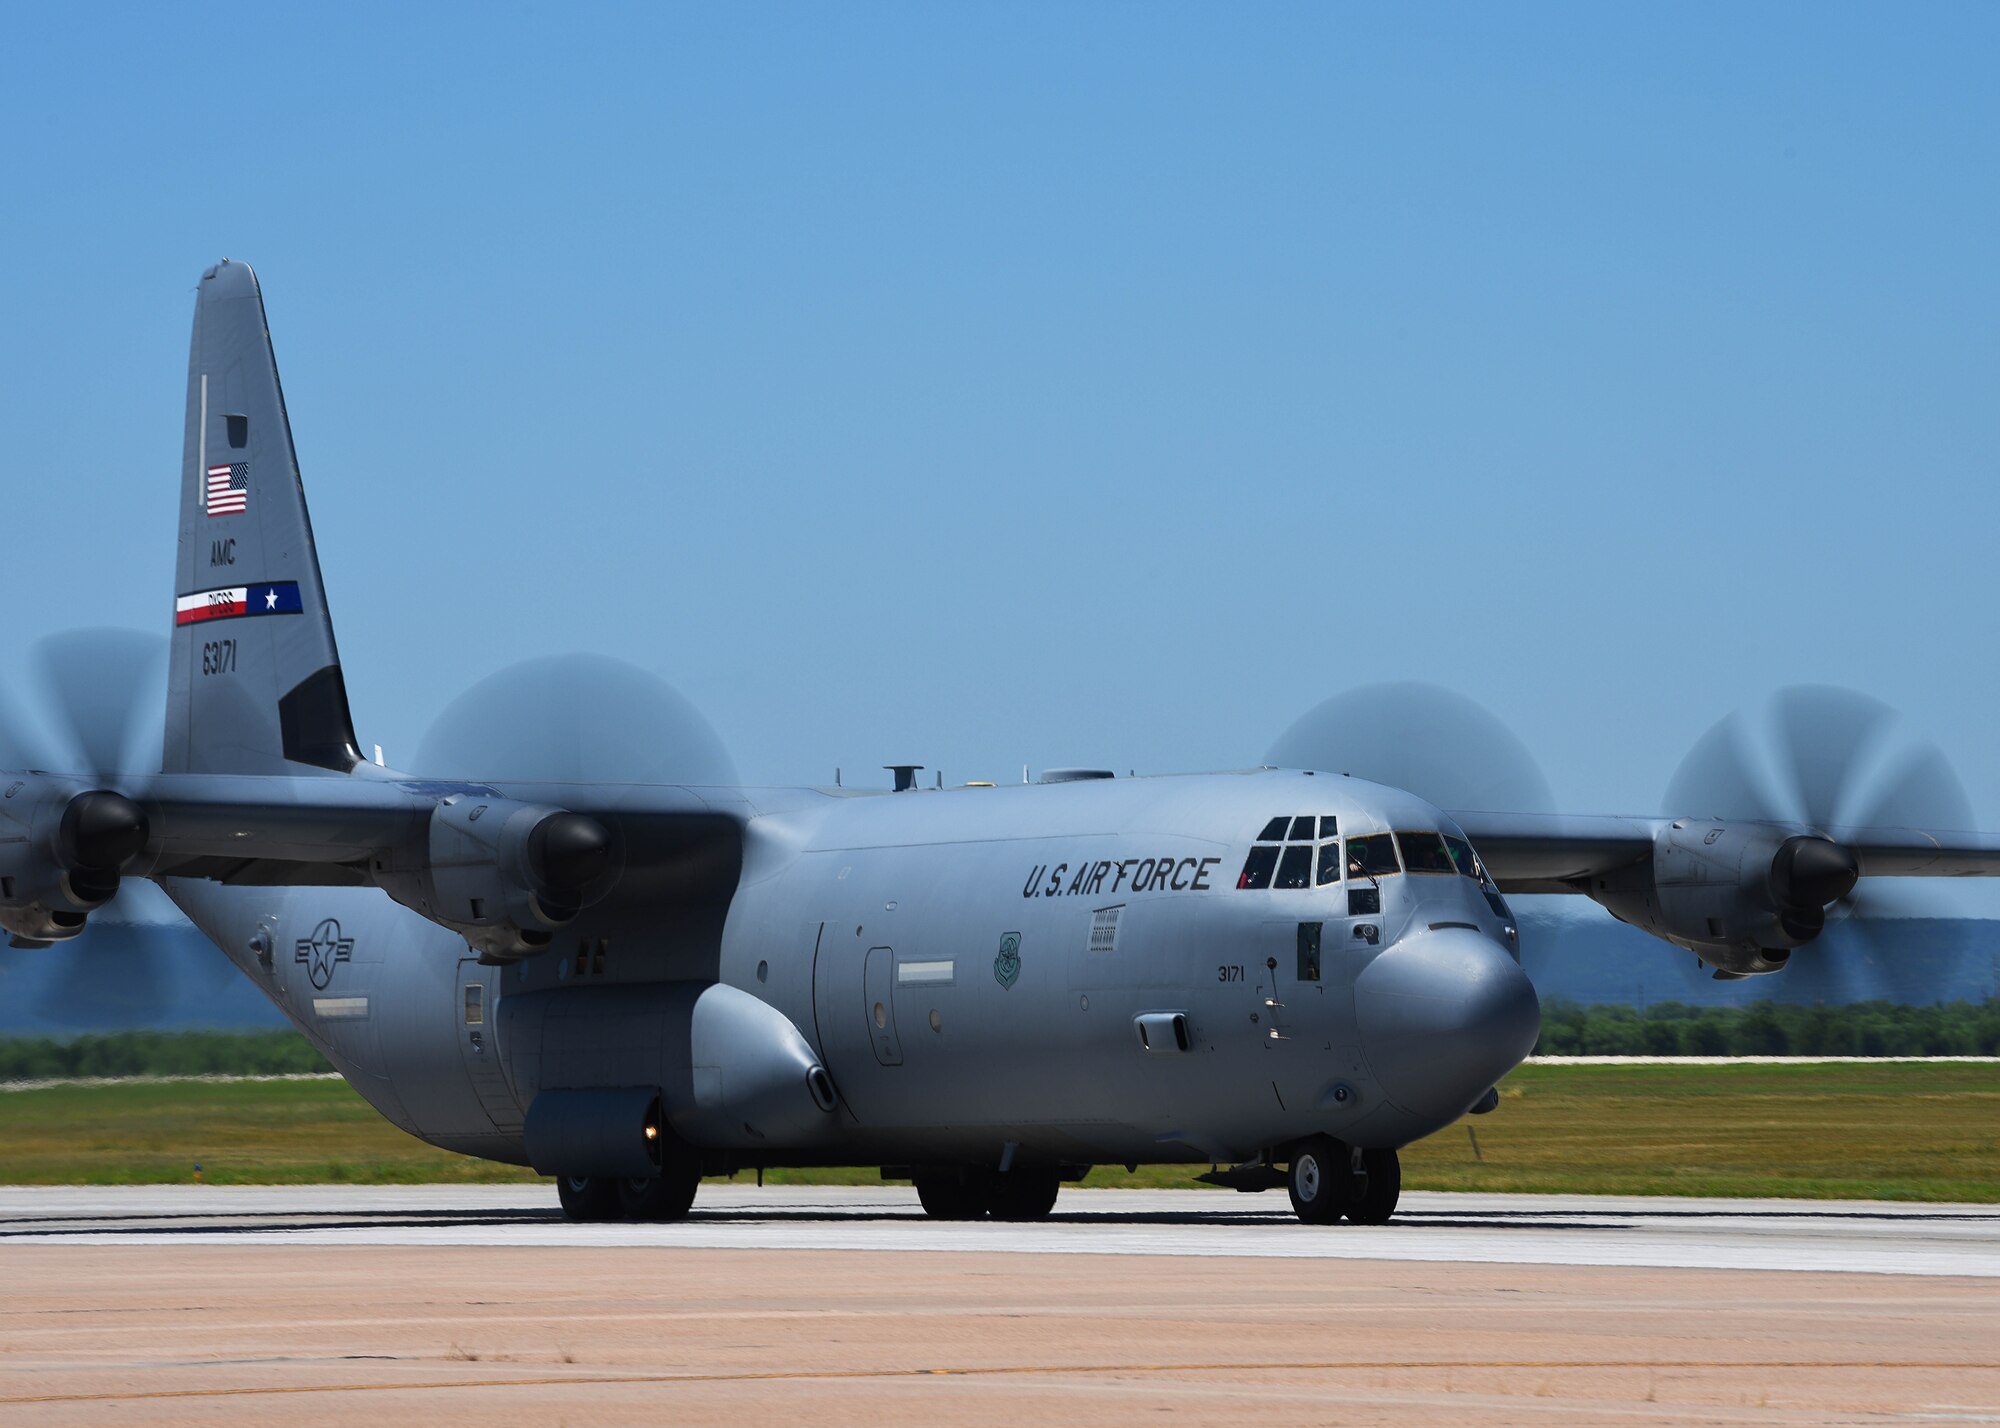 A C-130J Super Hercules prepares to depart Dyess Air Force Base, Texas, to participate in the U.S. Air Force Weapons School Joint Forcible Entry exercise June 6, 2020. The JFE exercise takes place at Nellis AFB, Nev. and is designed to be a large-scale air drop and land mobility mission. (U.S. Air Force photo by Senior Airman Mercedes Porter)